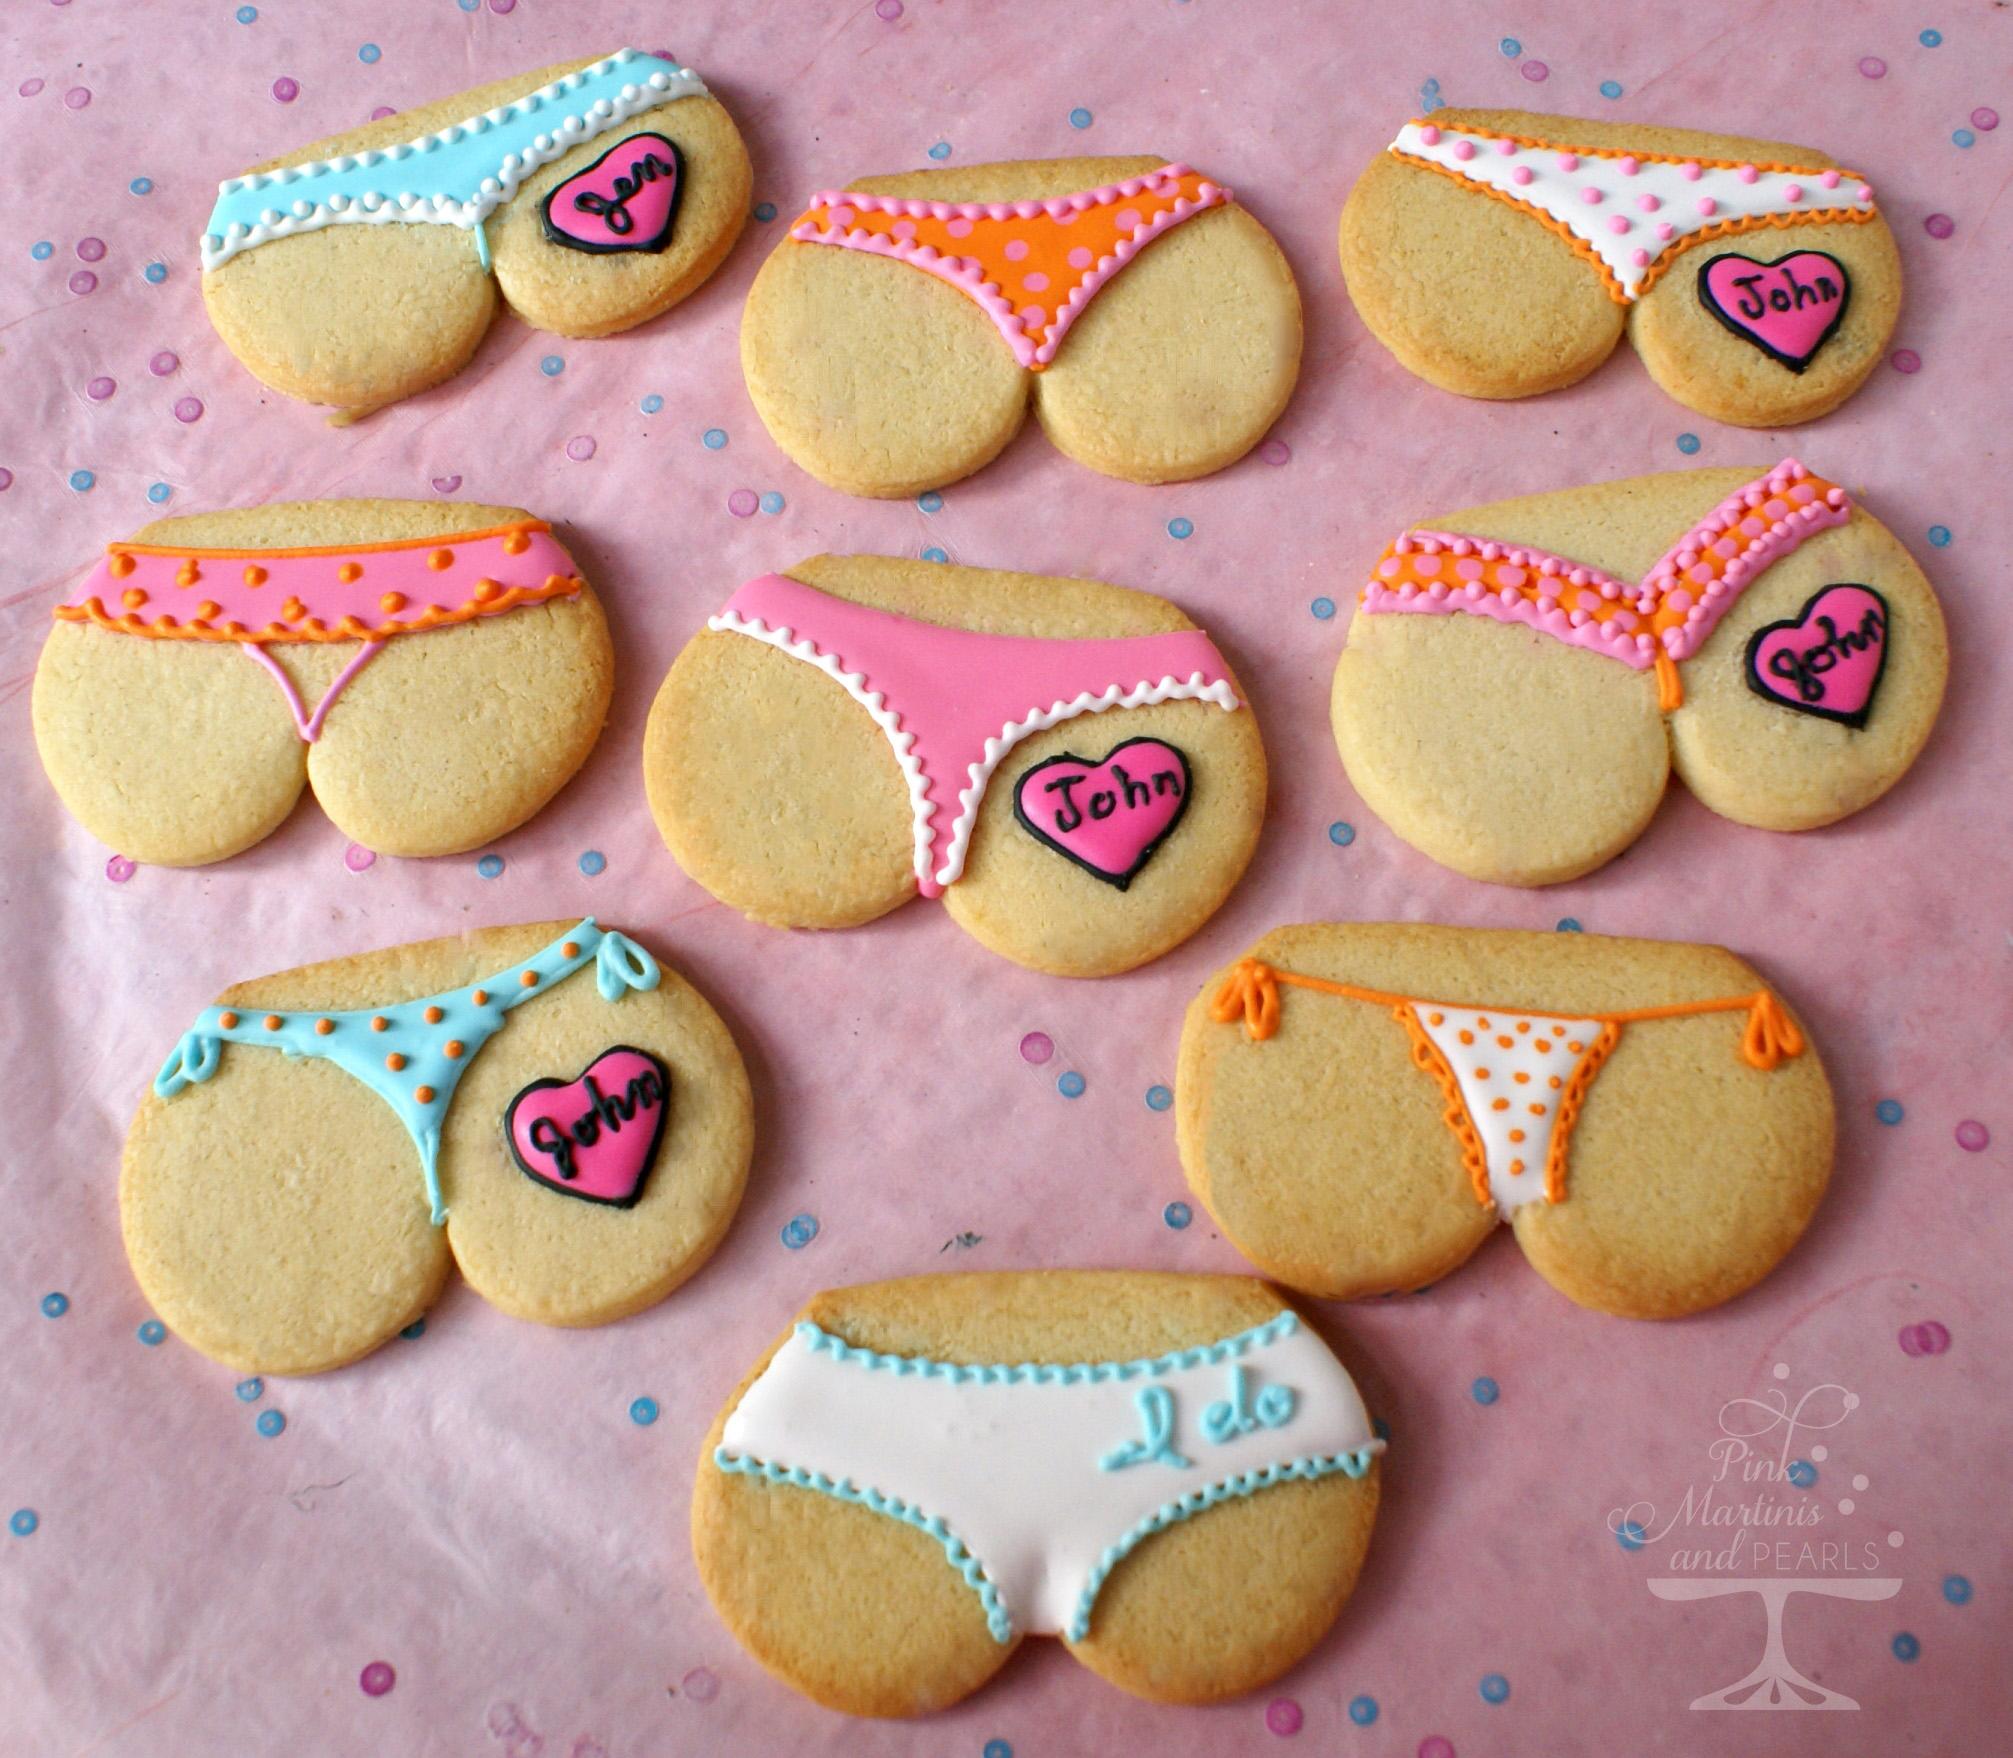 Made some lingerie cookies for a bridal shower. : r/pics